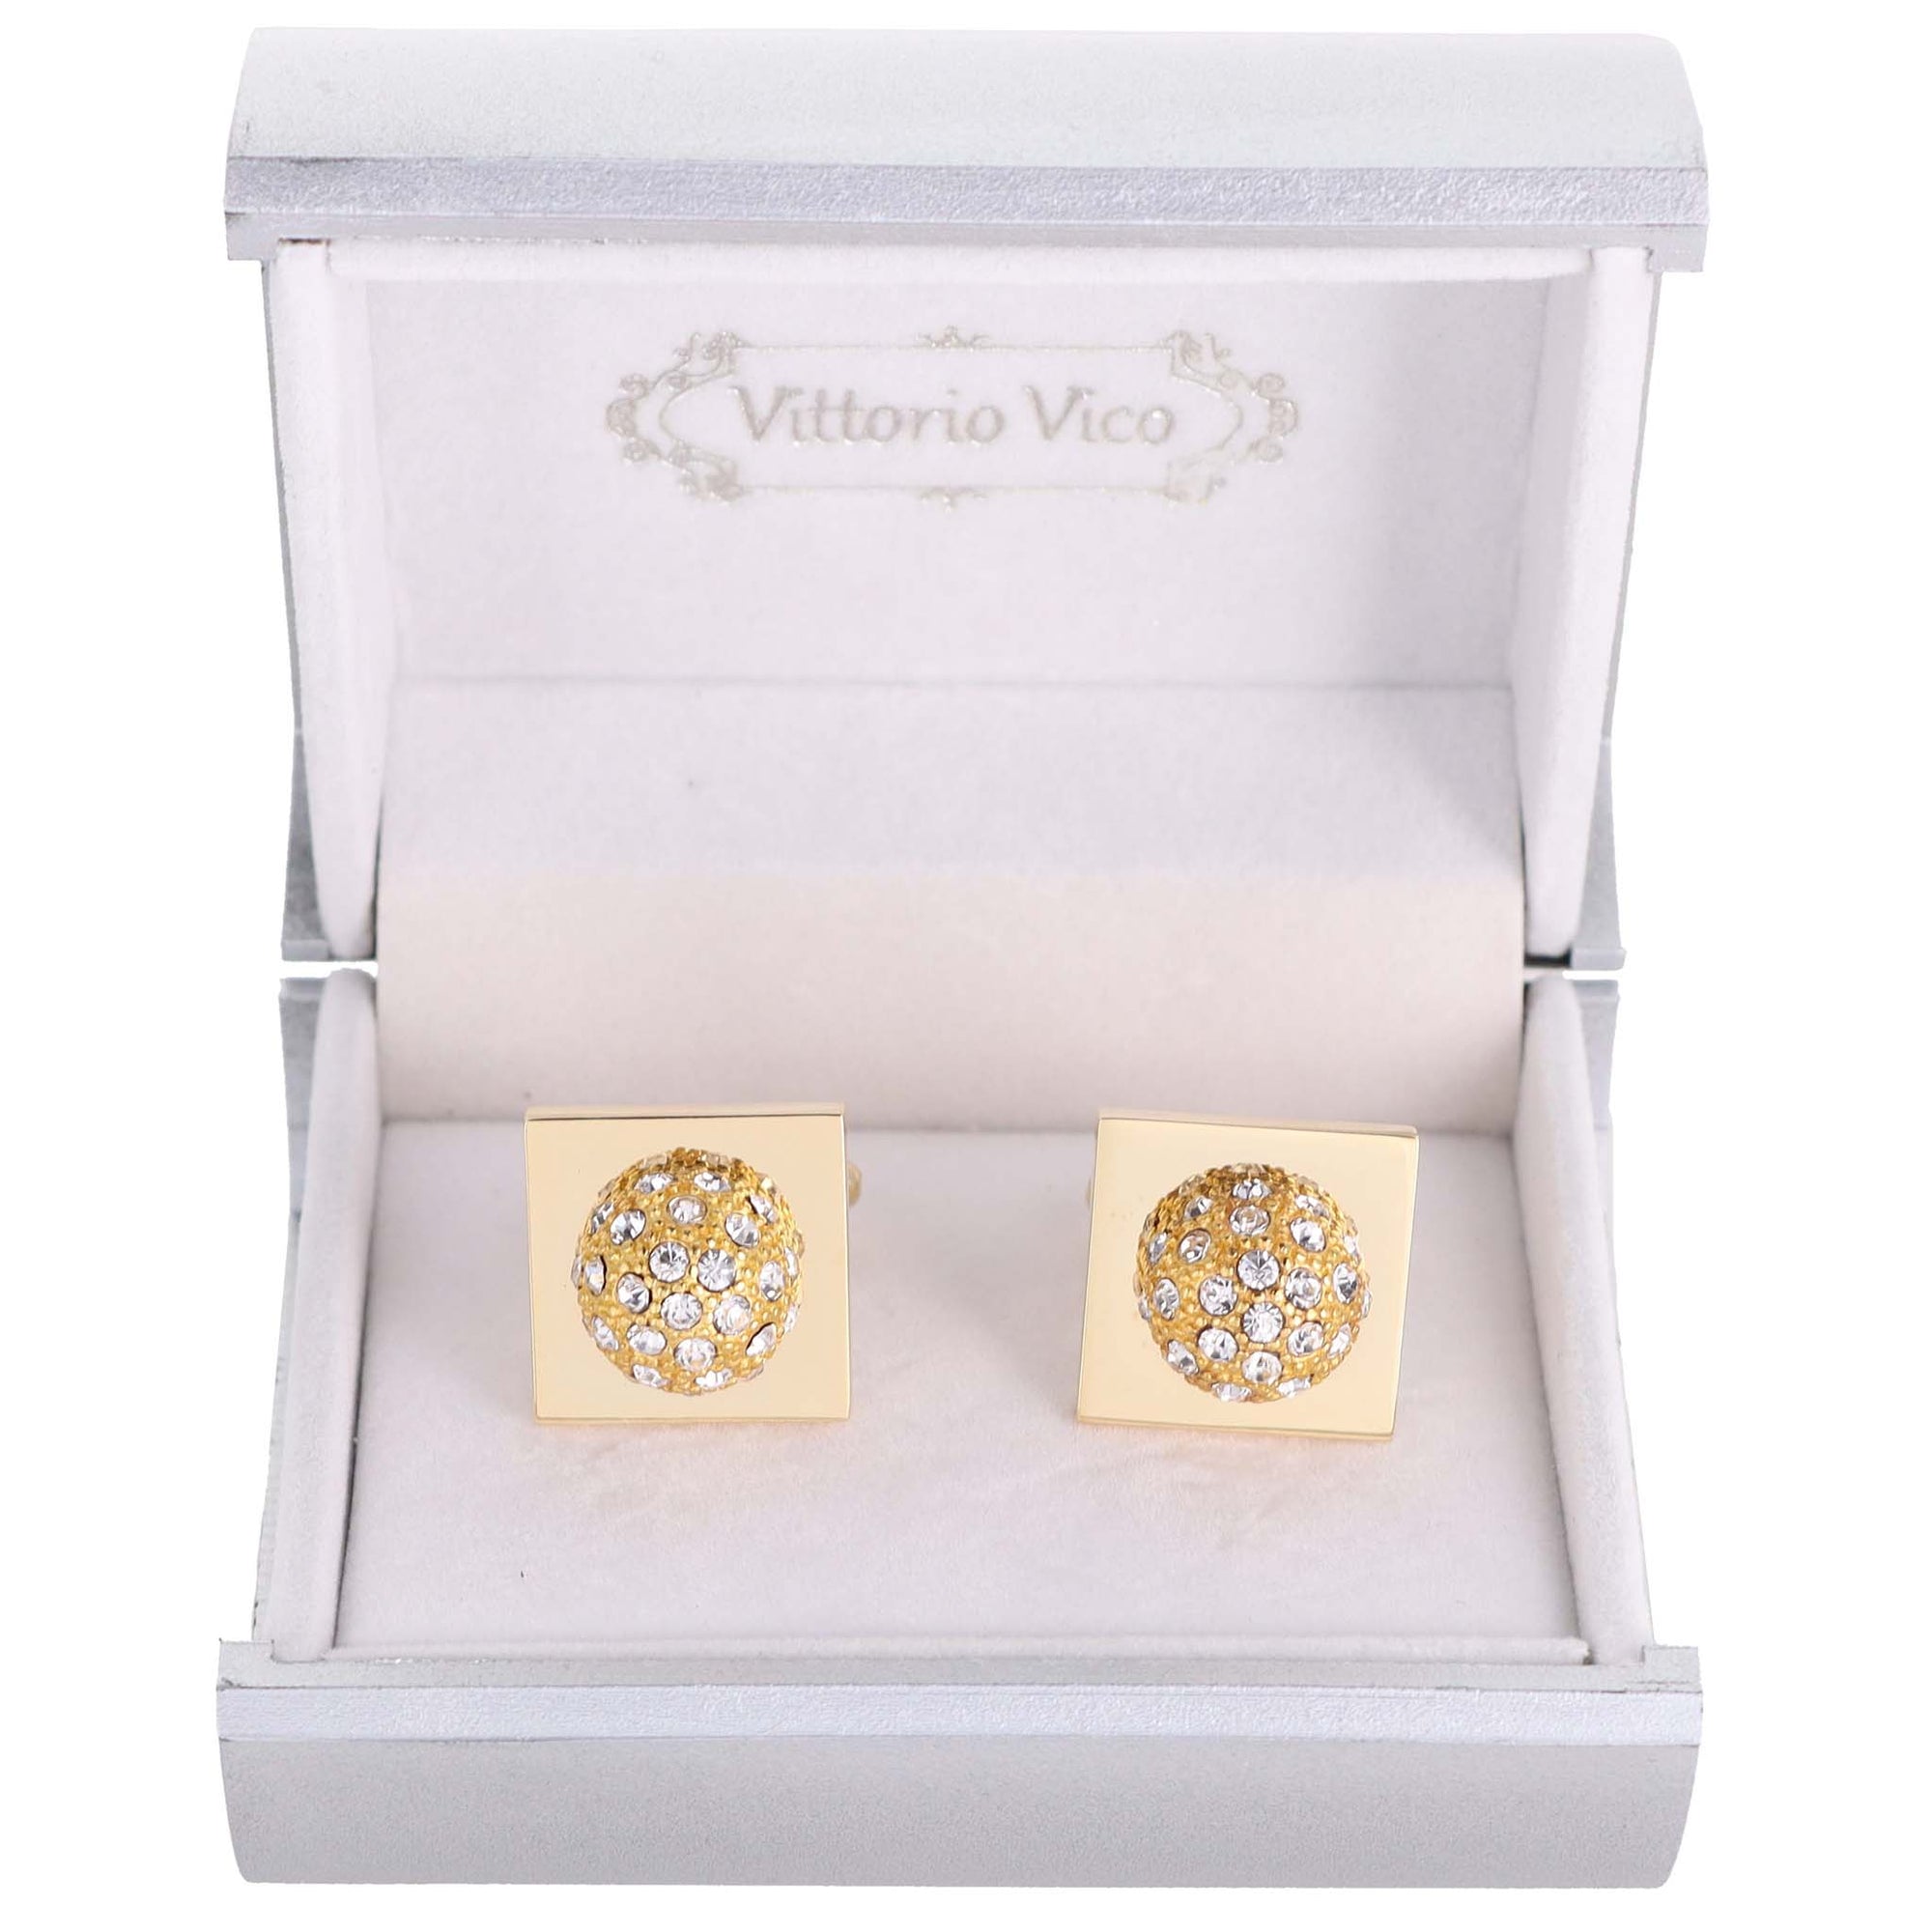 Vittorio Vico Colored Crystal Studded Flower Cufflinks (CL12XX Series)